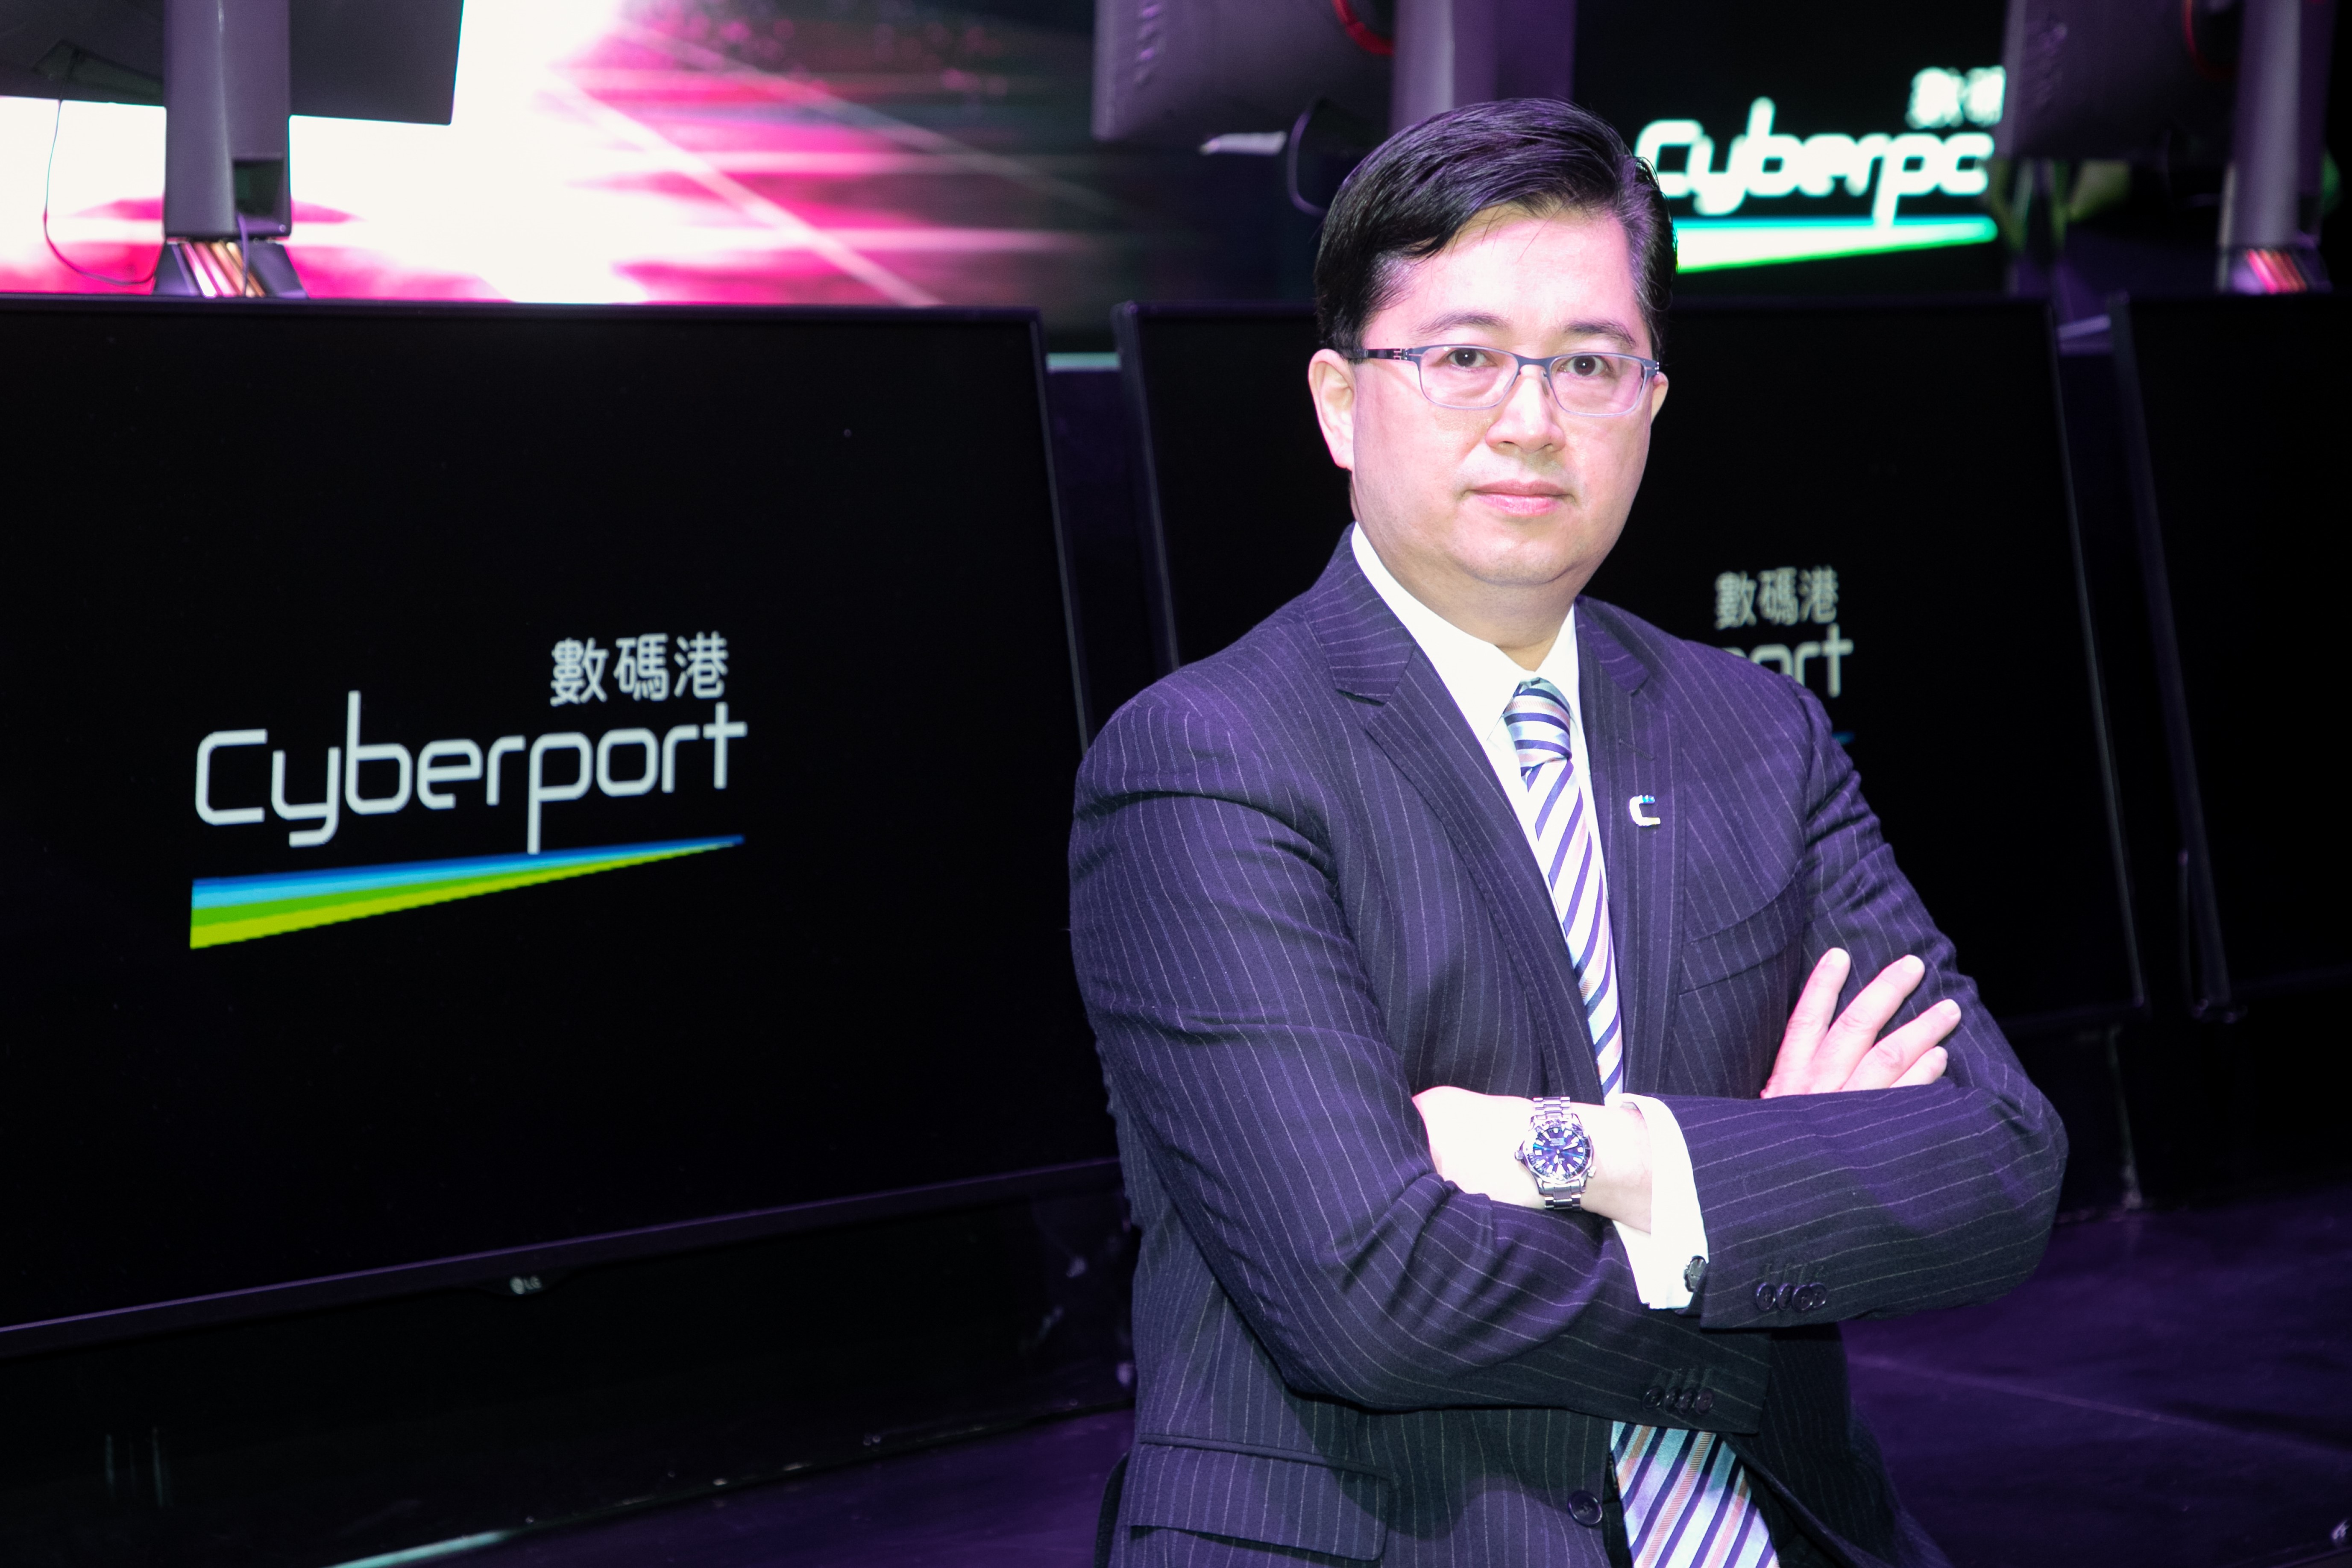 Eric Chan, Cyberport’s Chief Public Mission Officer, noted that Hong Kong is home to a number of outstanding gaming developers covering mobile games, consoles and arcade games. Cyberport will continue to utilise its diverse programmes to support start-ups, nurture talent and strengthen Hong Kong’s gaming industry.